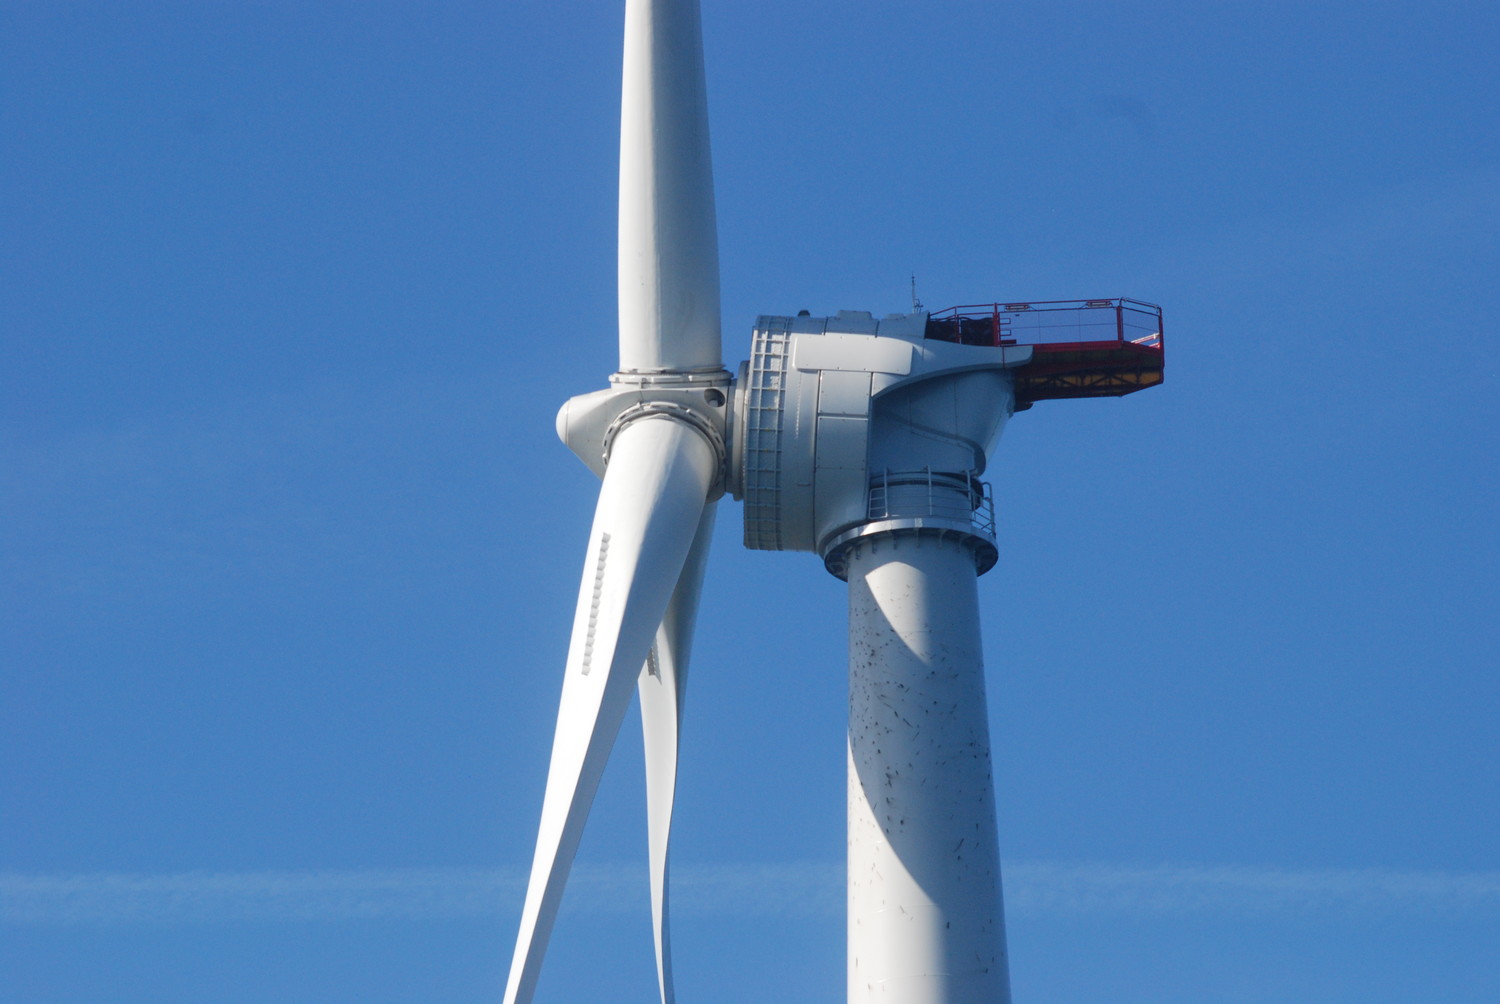 The turbines can spin the windmills' blades at more than 200 miles per hour, according to Deepwater Wind officials.